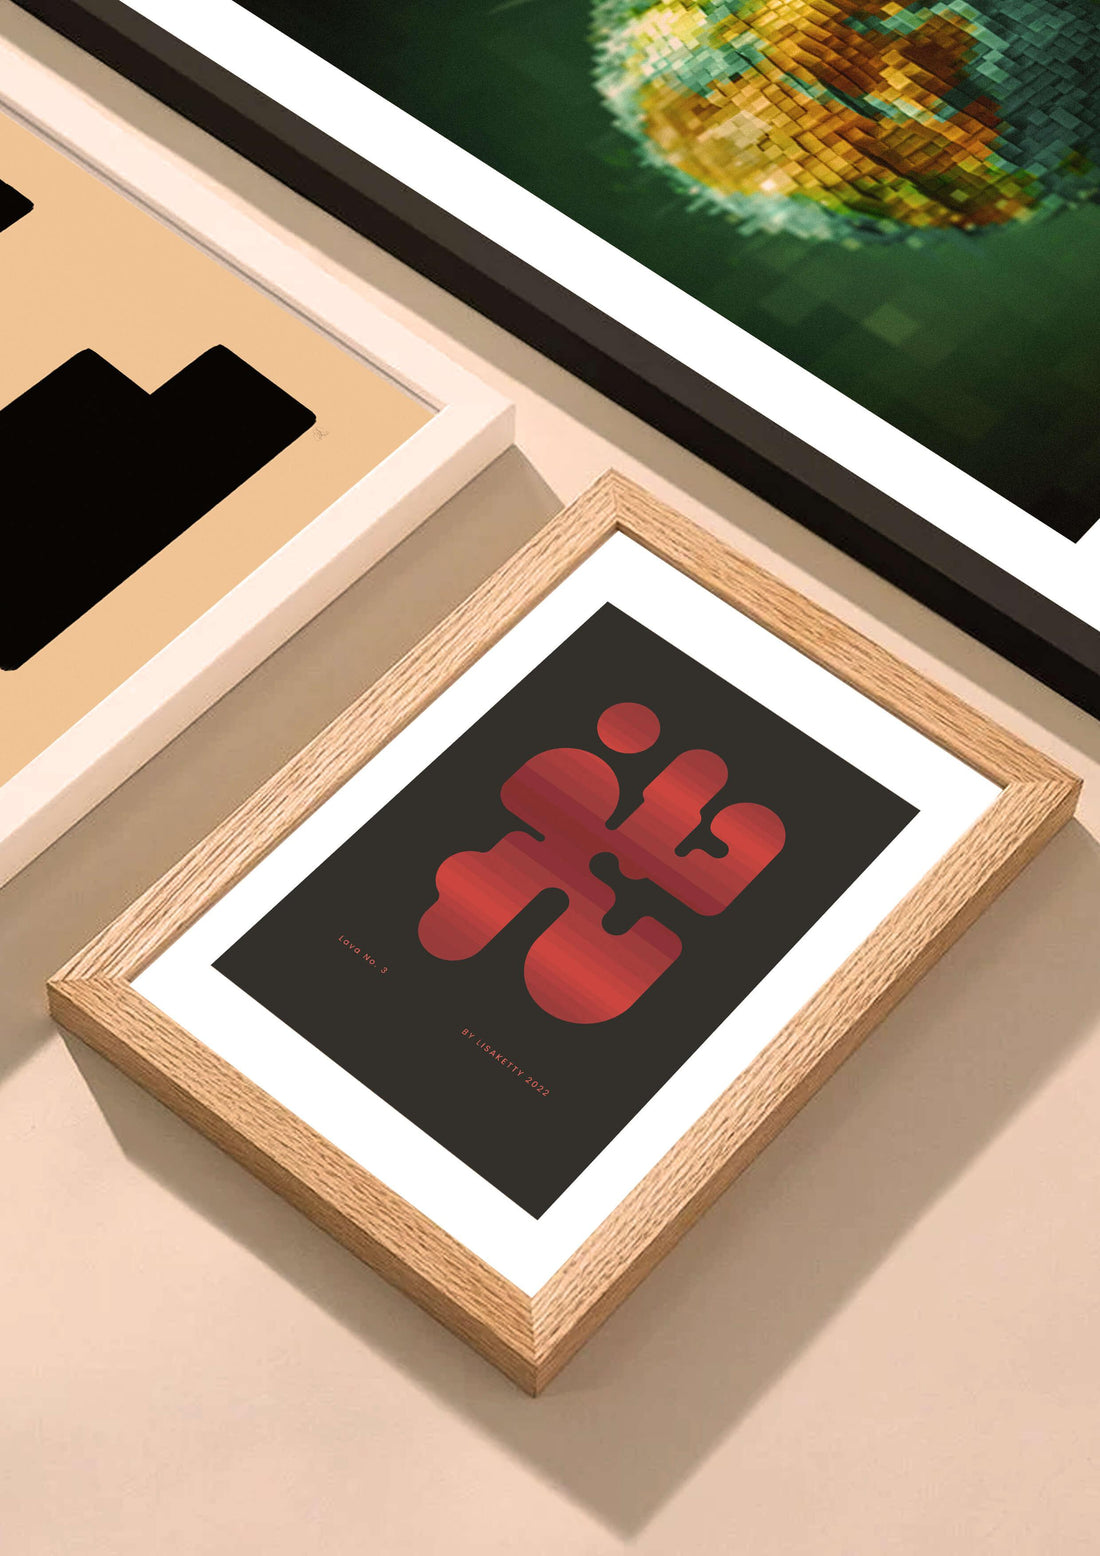 Master the Art of Framing and Preservation with HiPosterShop's Custom Frames